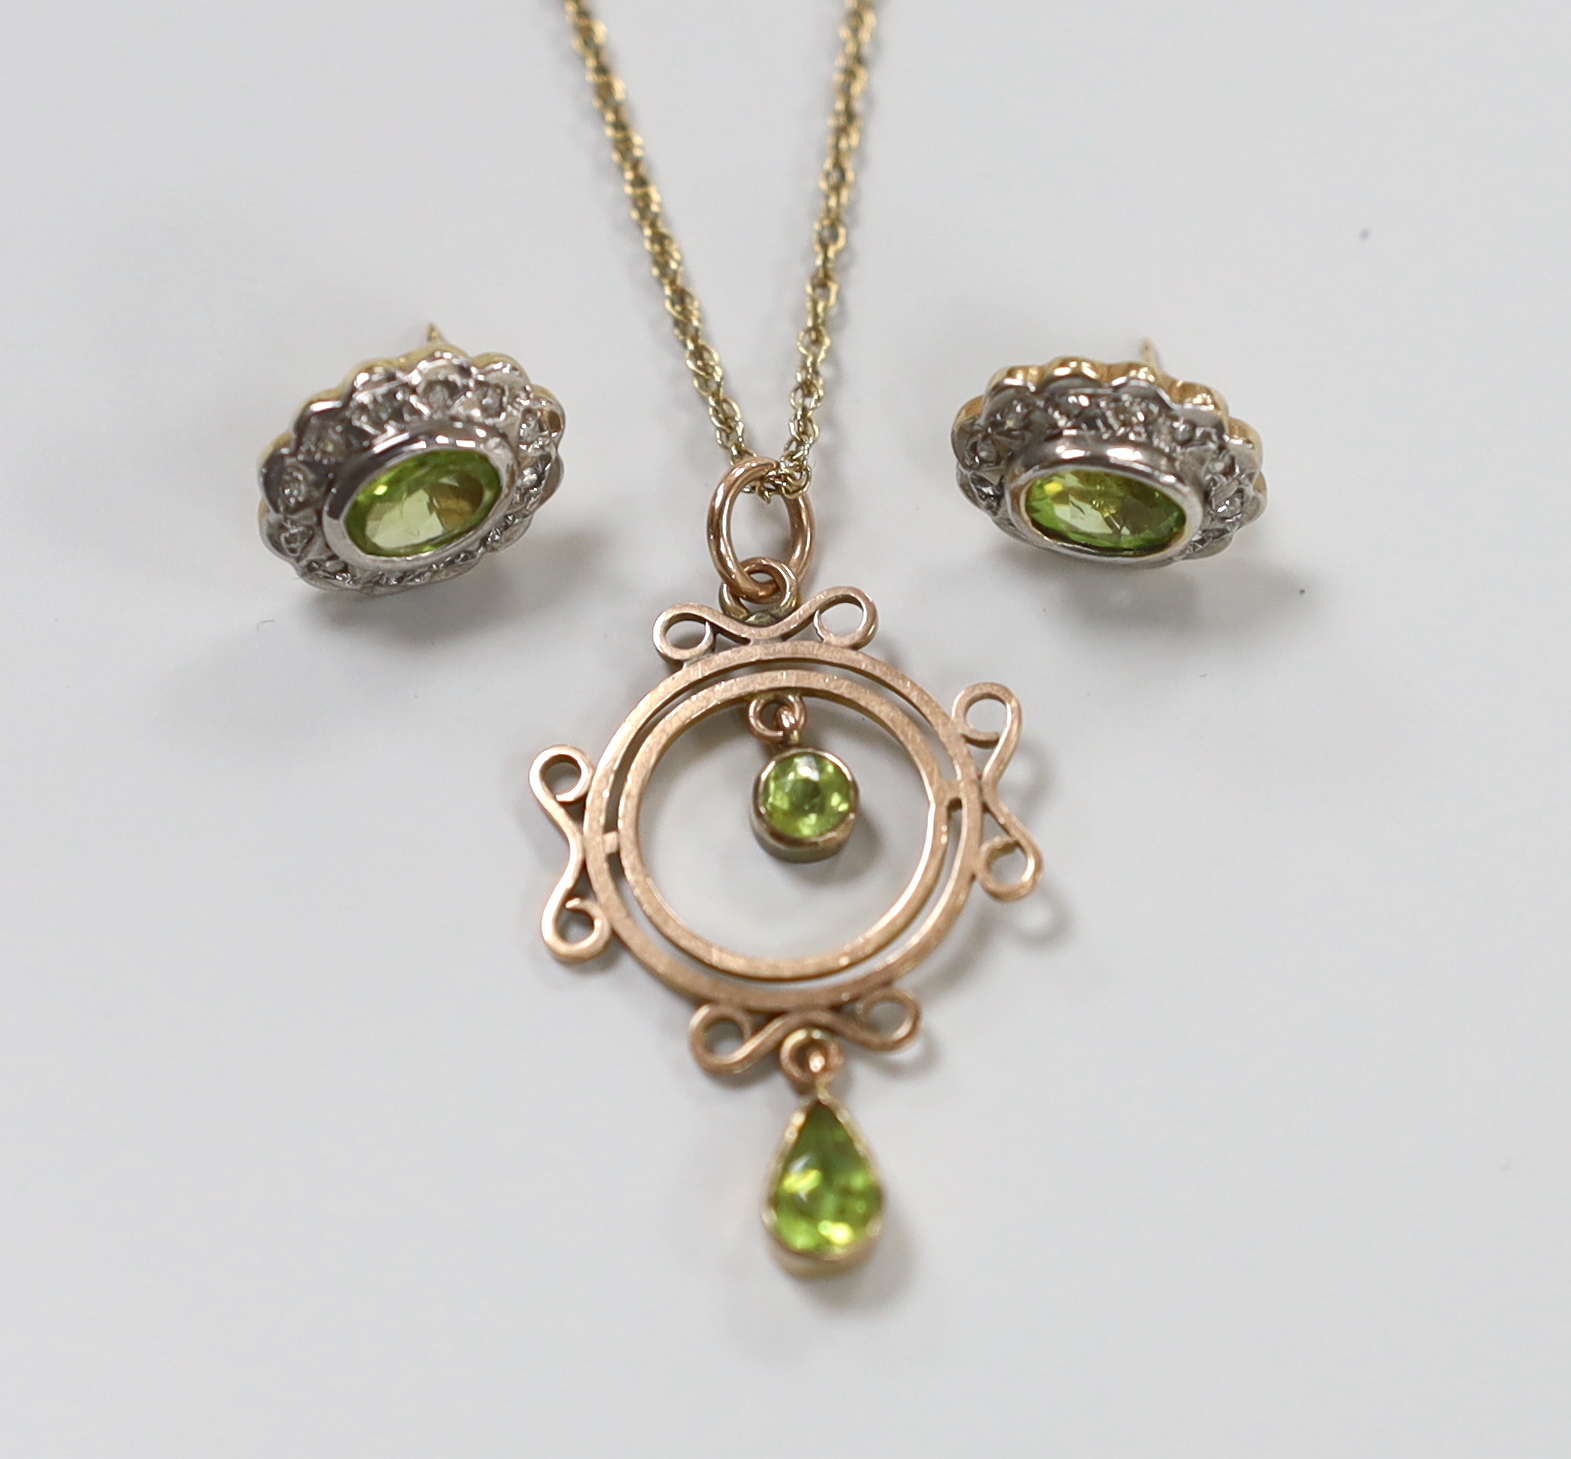 An early 20th century rose gold and peridot pendant necklace, on later chain, gross 3.5 grams and